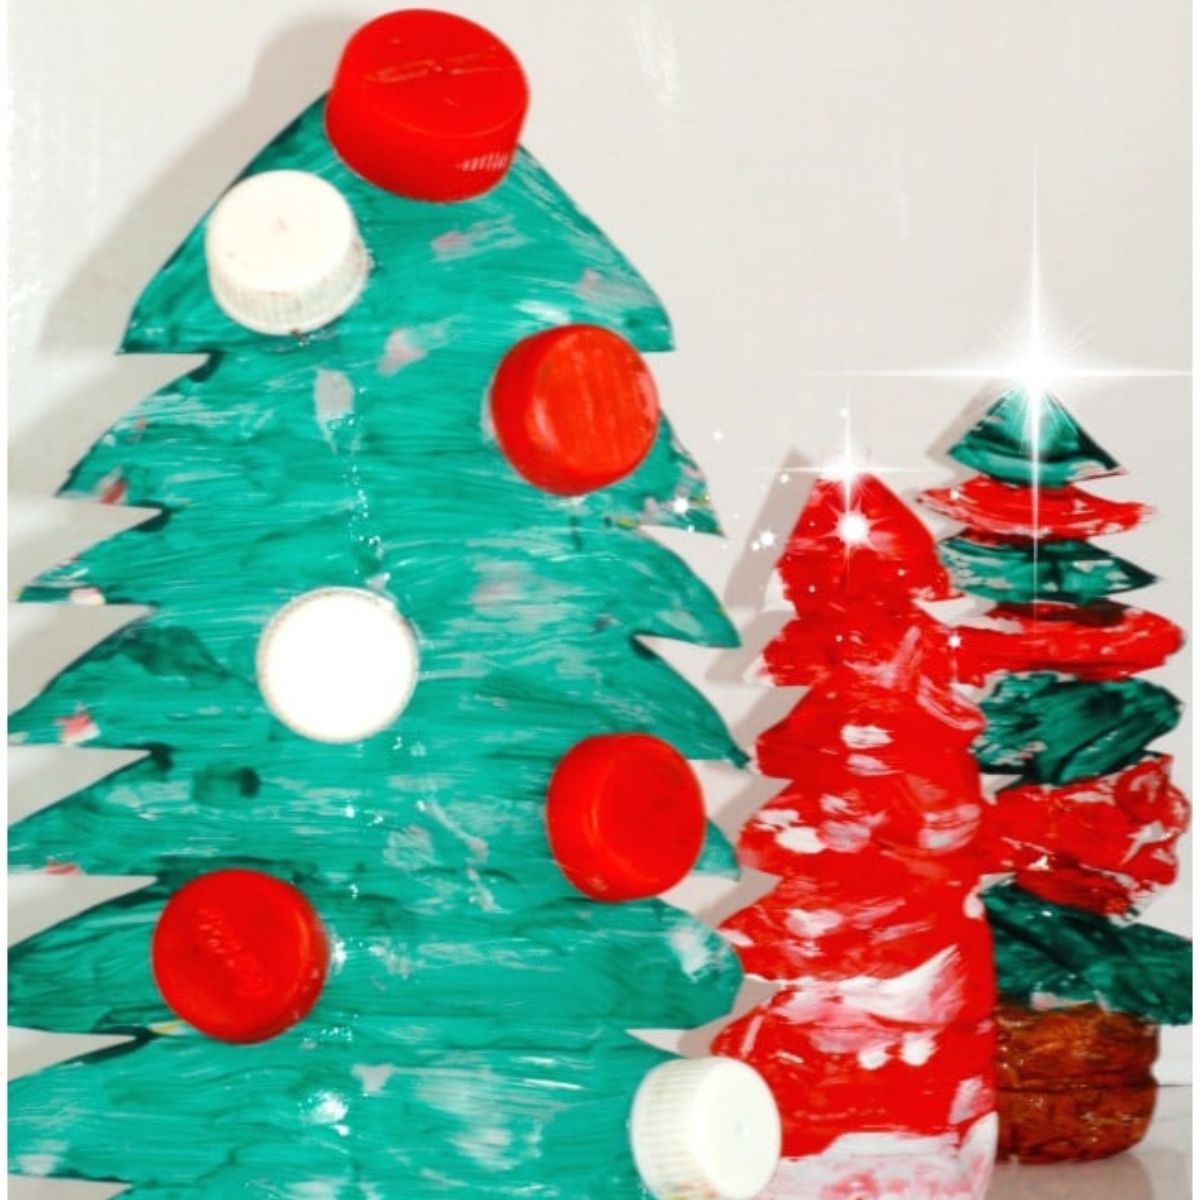 Christmas Craft Ideas that are Upcycled and Repurposed